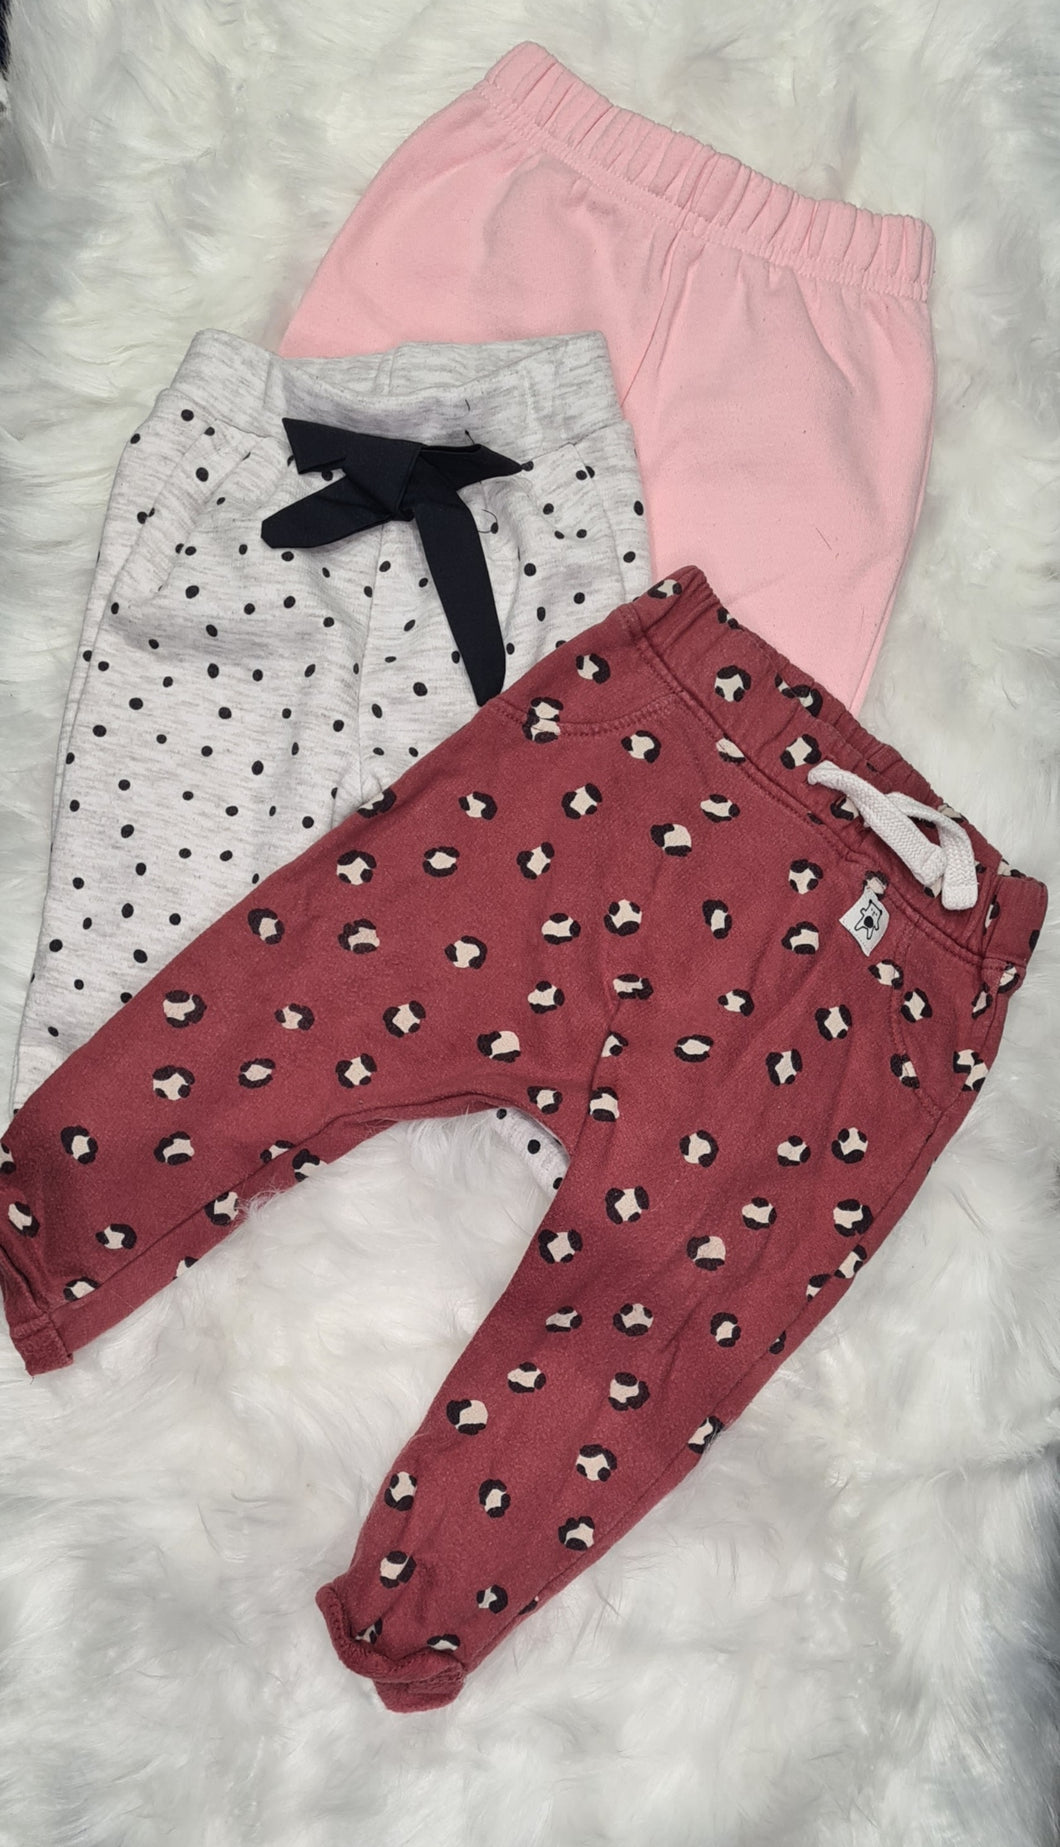 Girls 6-9 months - Set of 3 Joggers - Pink, White and Red